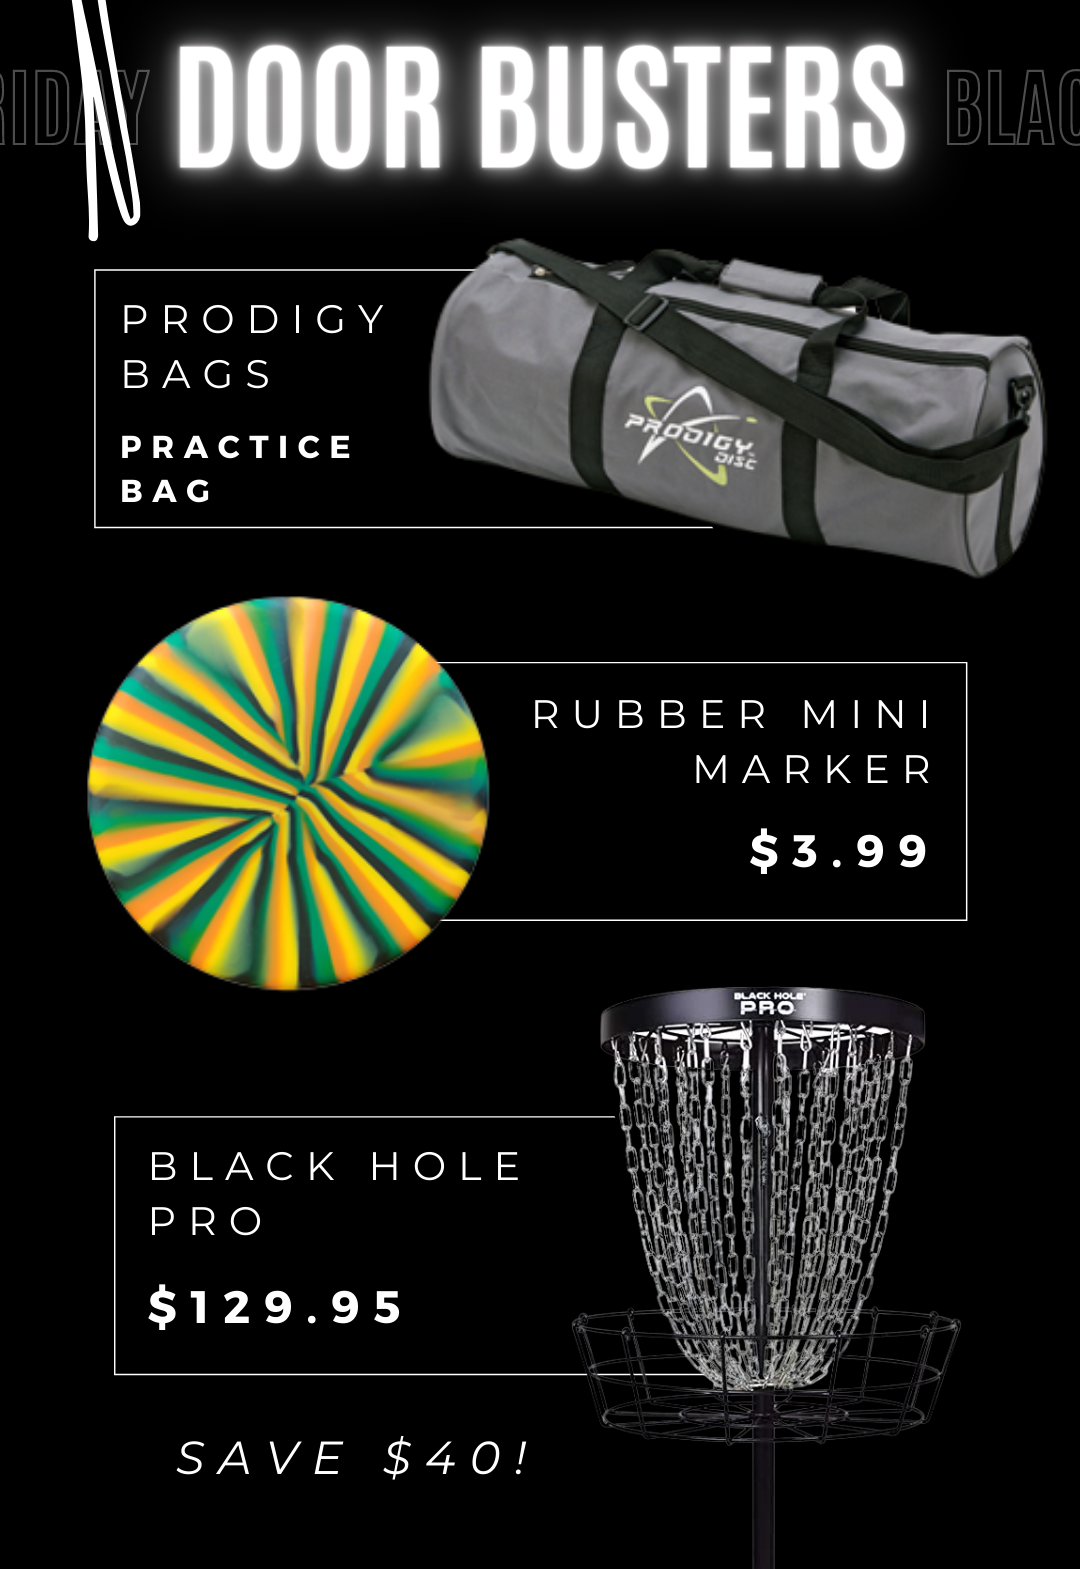 Disc Golf Baskets and Minis at Black Friday Prices